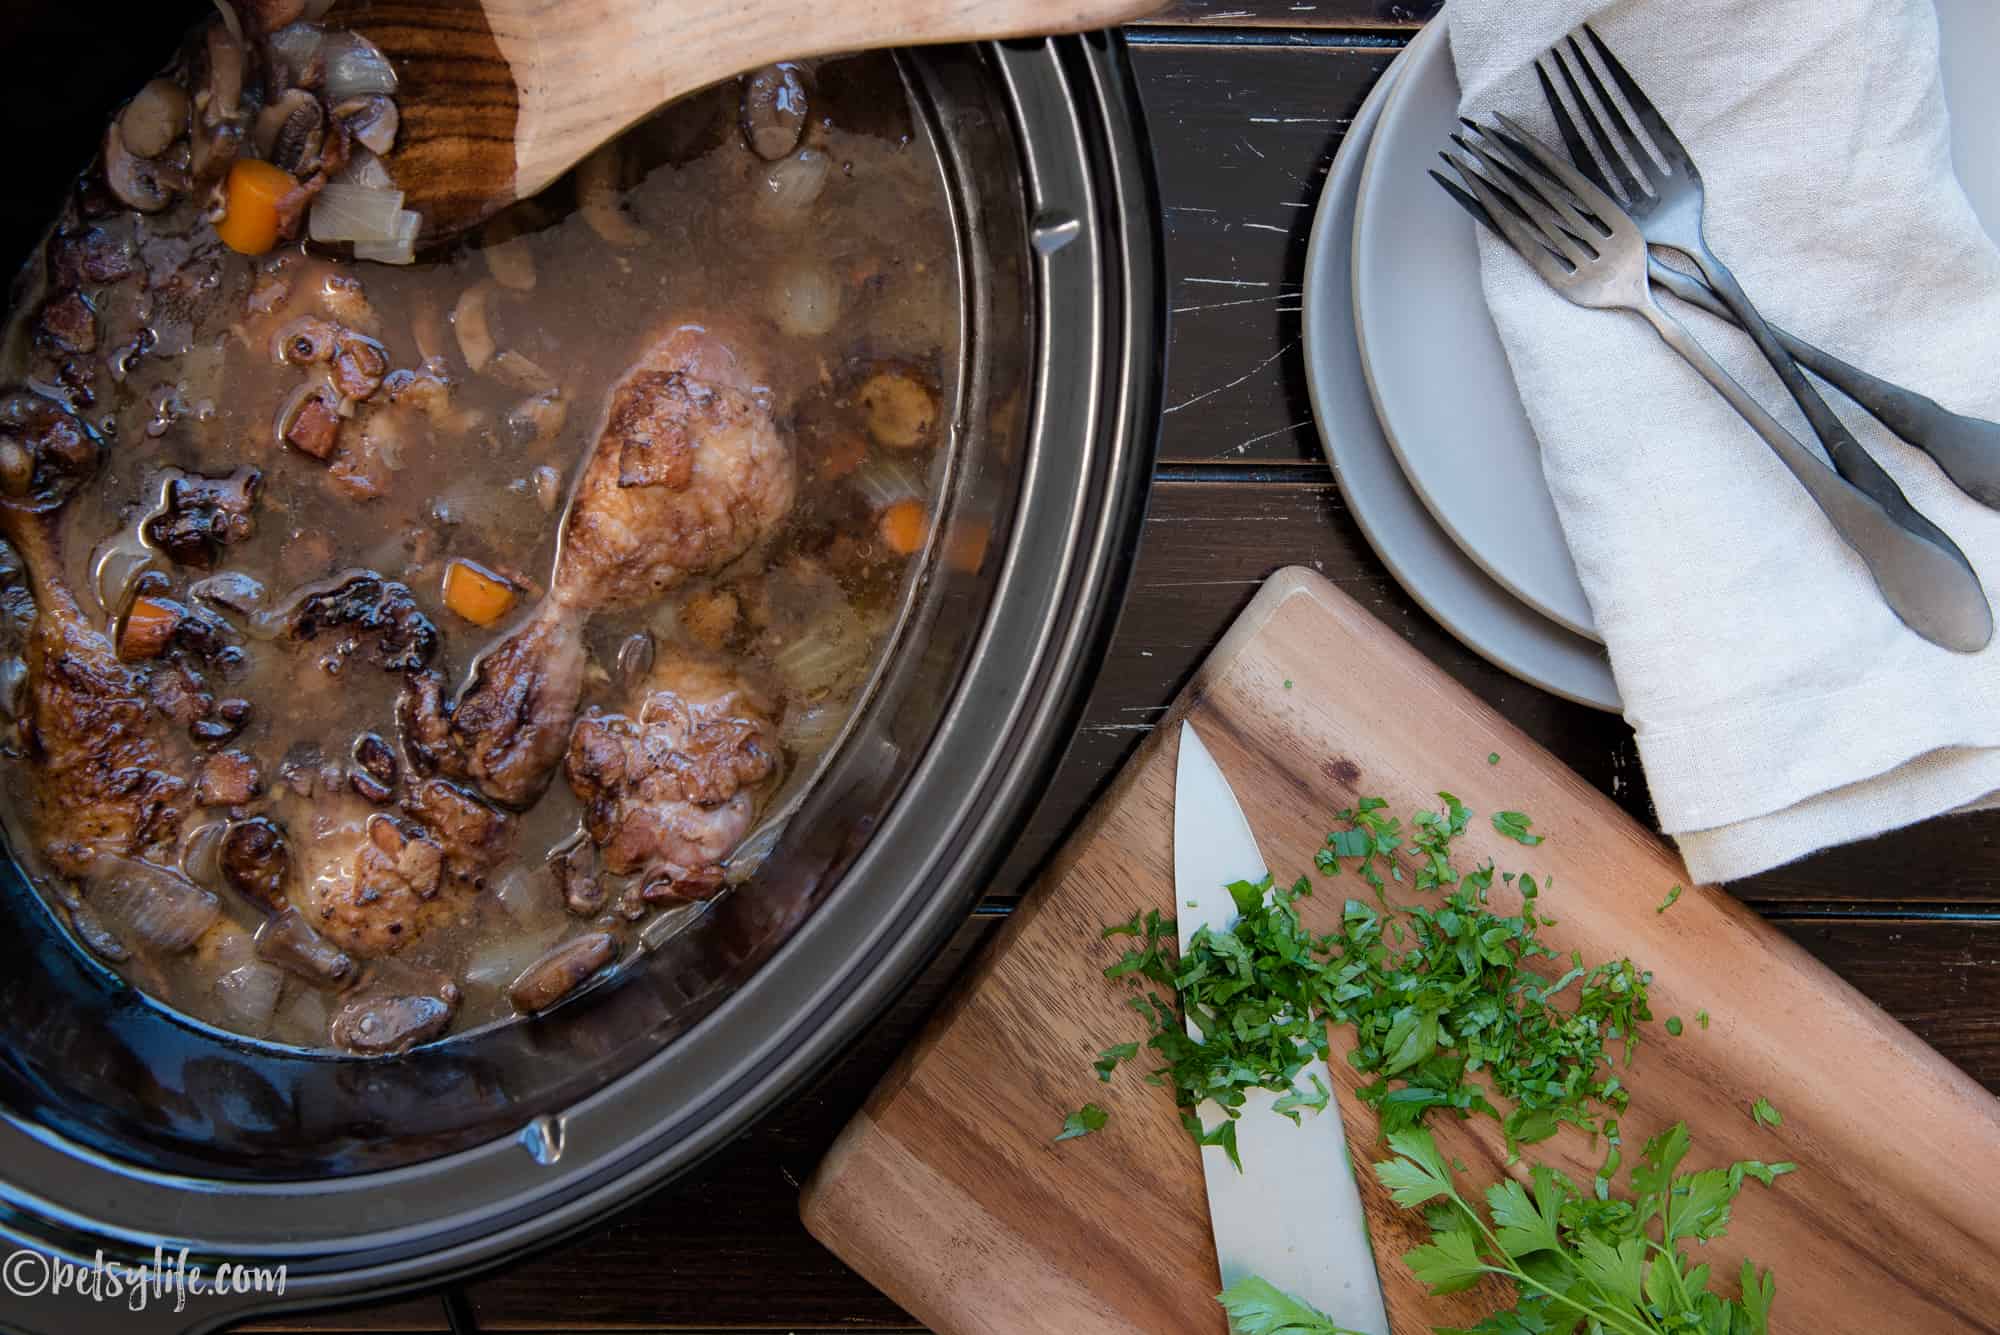 Crock pot filled with coq au vin next to stack of plates and cutting board with herbs 